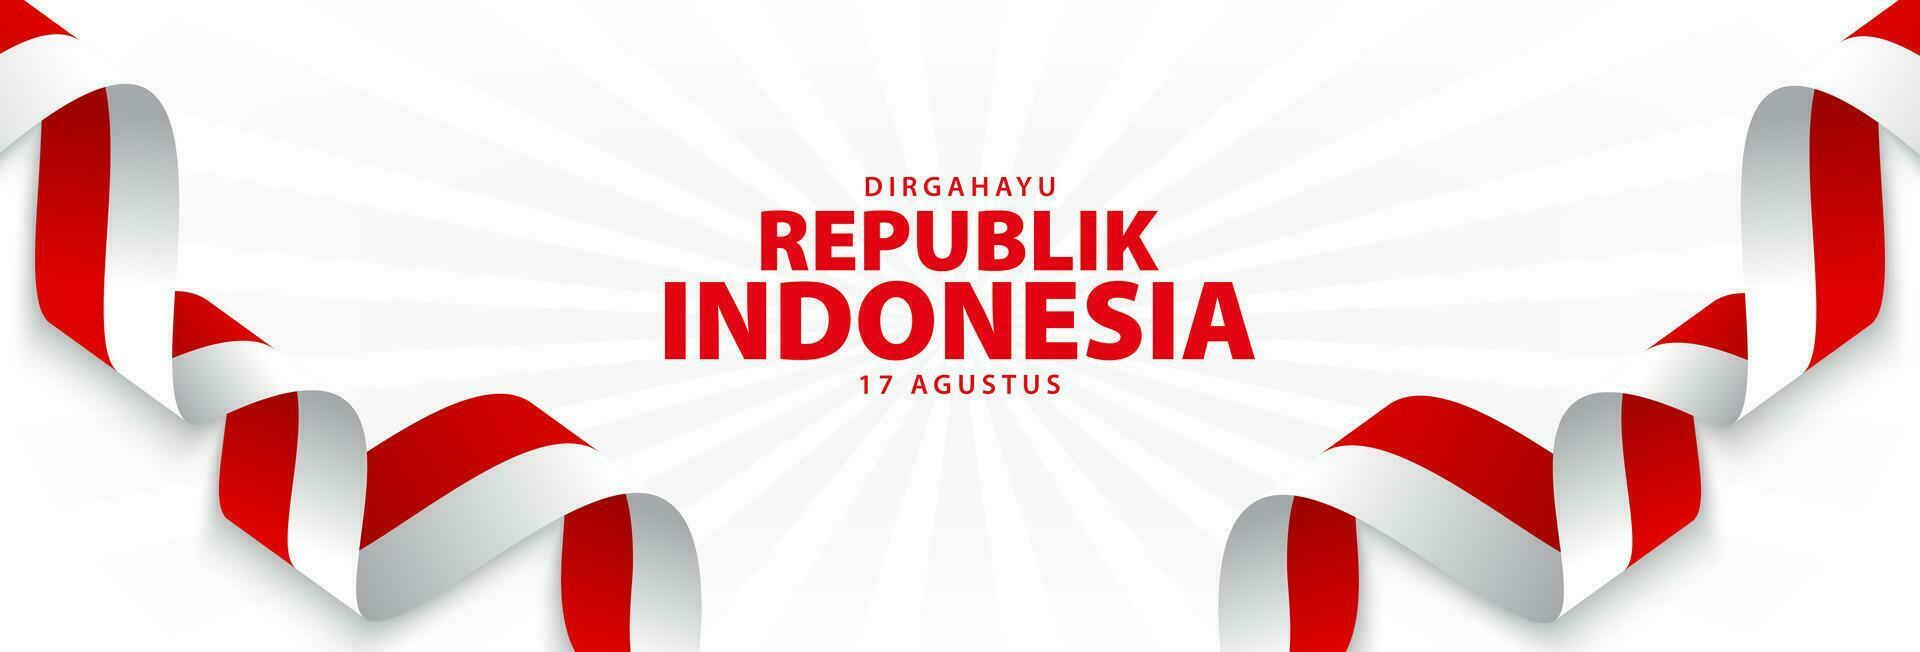 Indonesia's independence banner, August 17th. Indonesia independence day with red and white ribbon decoration. Vector illustration